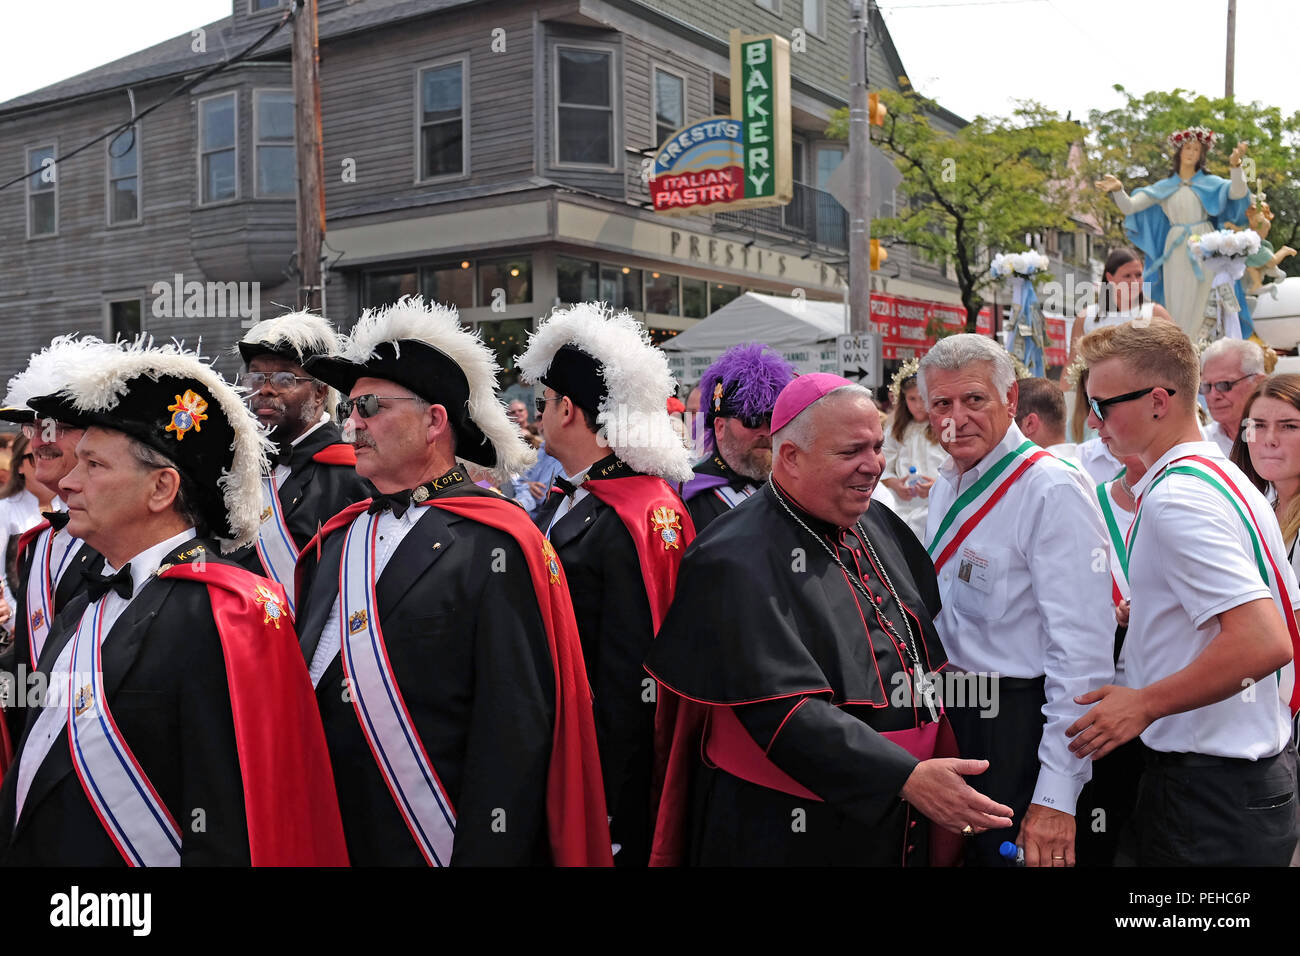 Cleveland, Ohio, USA. 15th Aug, 2018. Participants in the 120th Feast of the Assumption procession in Cleveland's Little Italy prepare for commencement.  The Holy Rosary church Virgin Mary is ready to be paraded through the streets of this Italian enclave while procession participants including the Cleveland Bishop and members of the K of C wait in front of Presti's Bakery on Mayfield Road.  Credit: Mark Kanning/Alamy Live News. Stock Photo